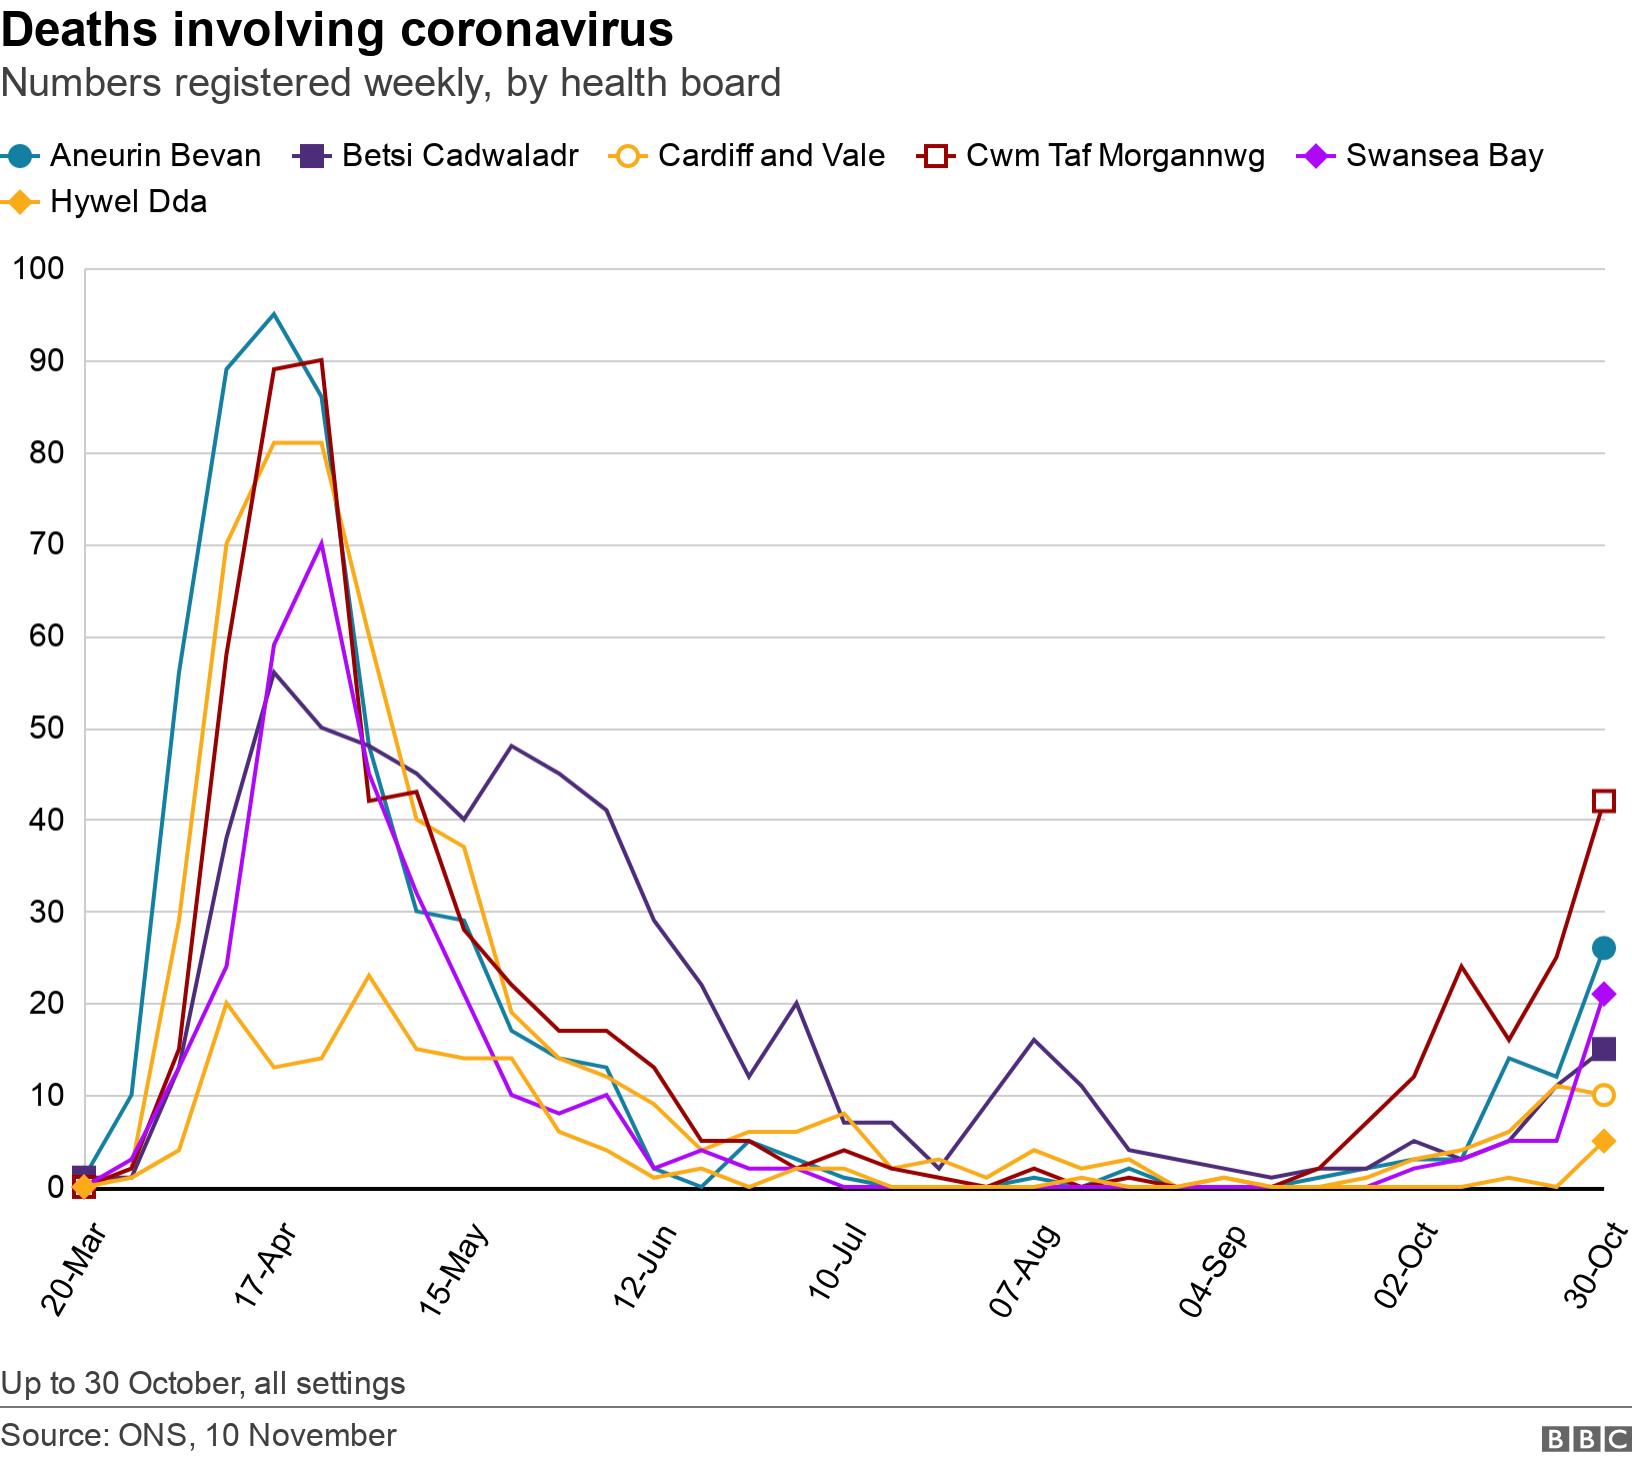 Deaths involving coronavirus. Numbers registered weekly, by health board. Up to 30 October, all settings.